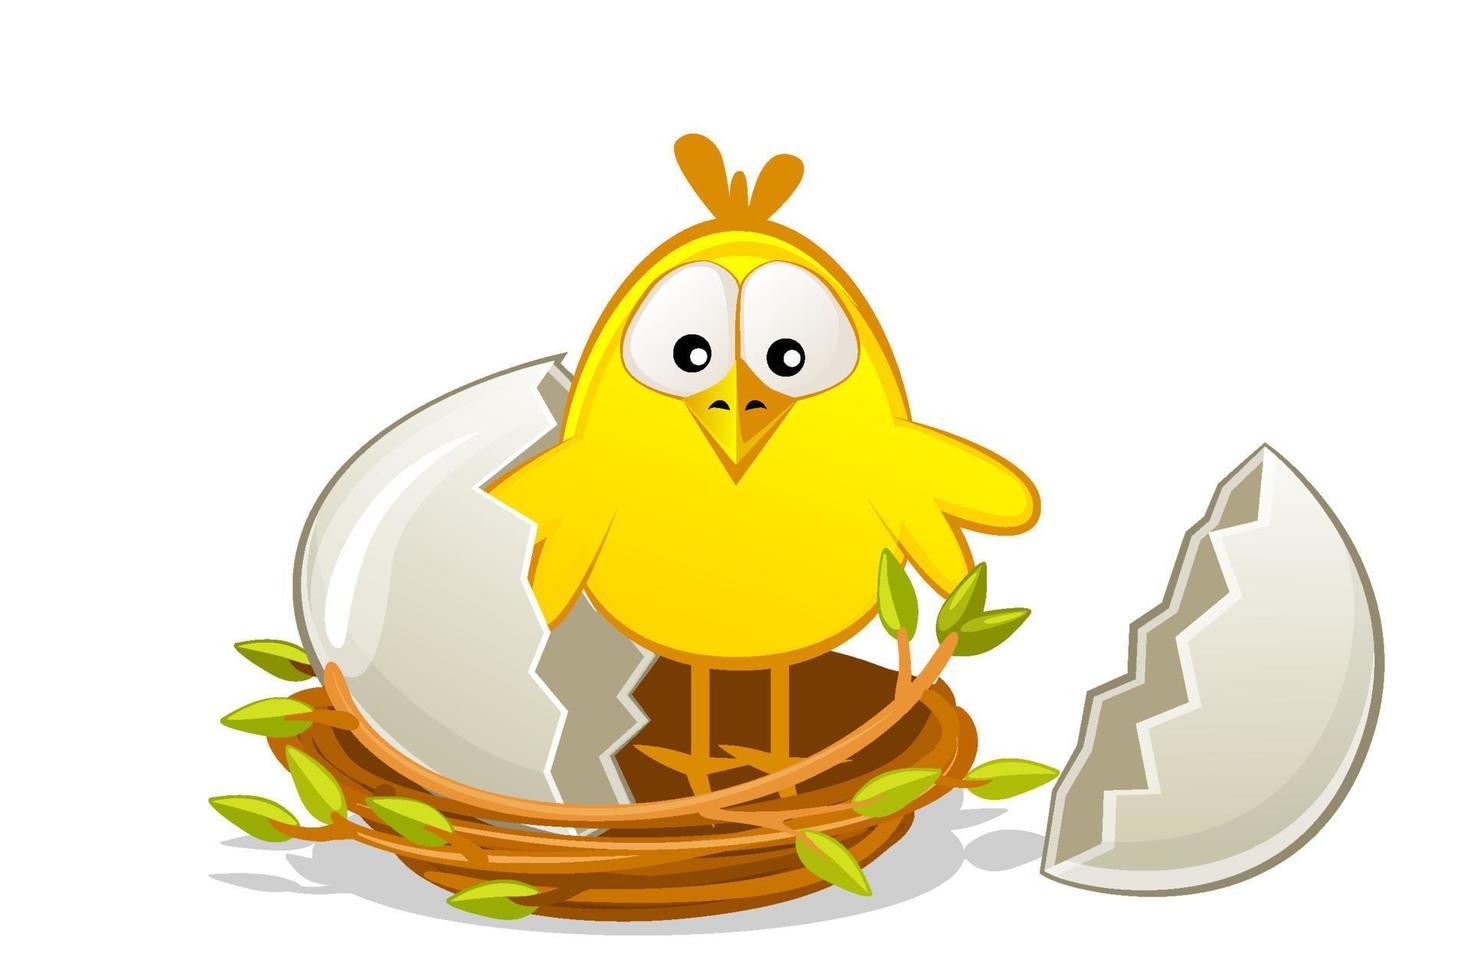 Cute newborn chick in a nest of twigs. Broken egg. Happy easter. Vector flat illustration for kids.